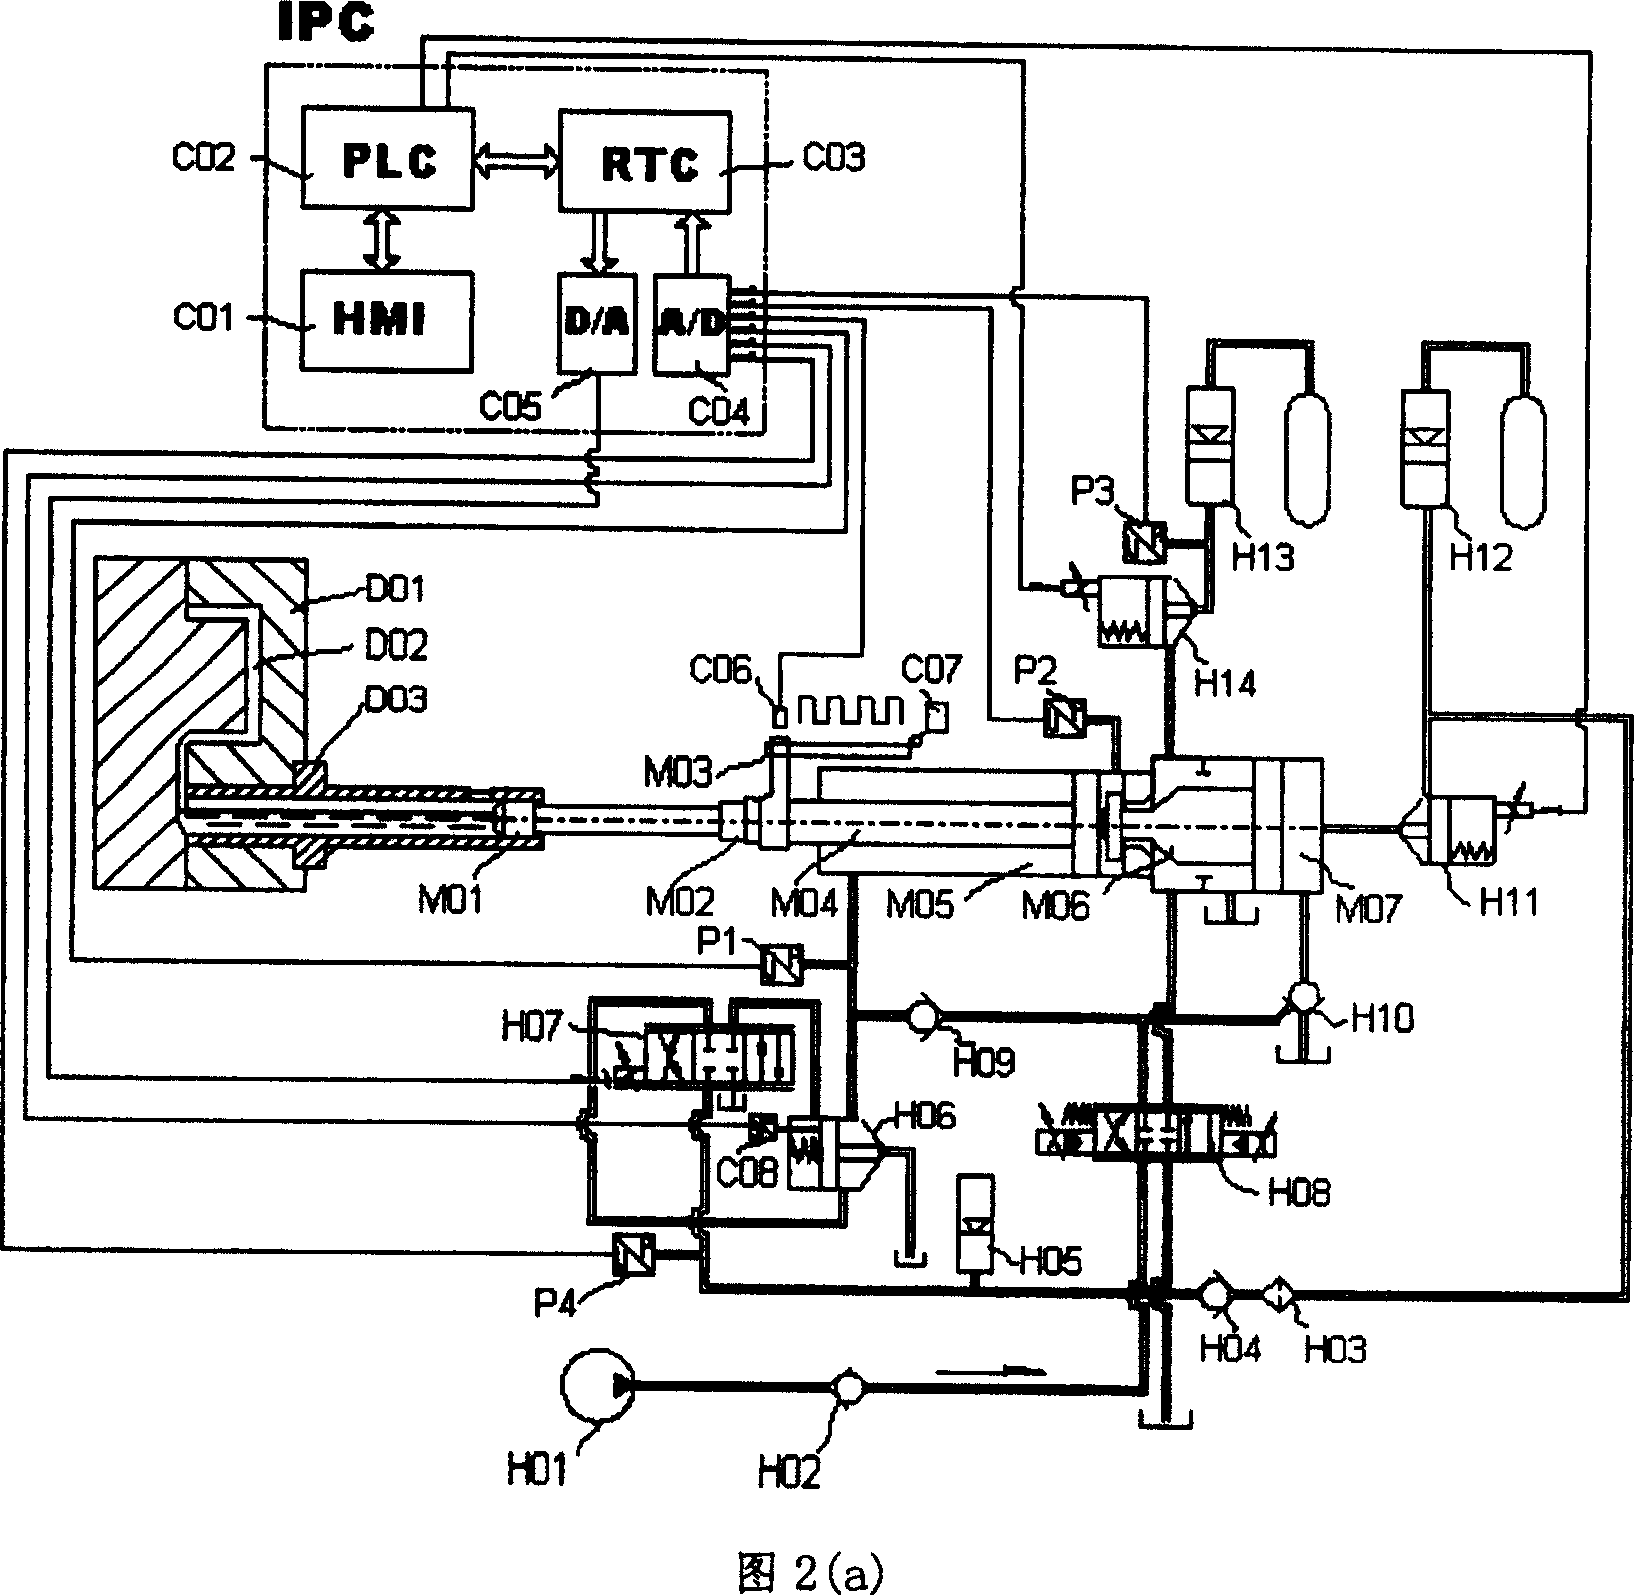 Pressure jetting unit for pressure casting machine and its control method